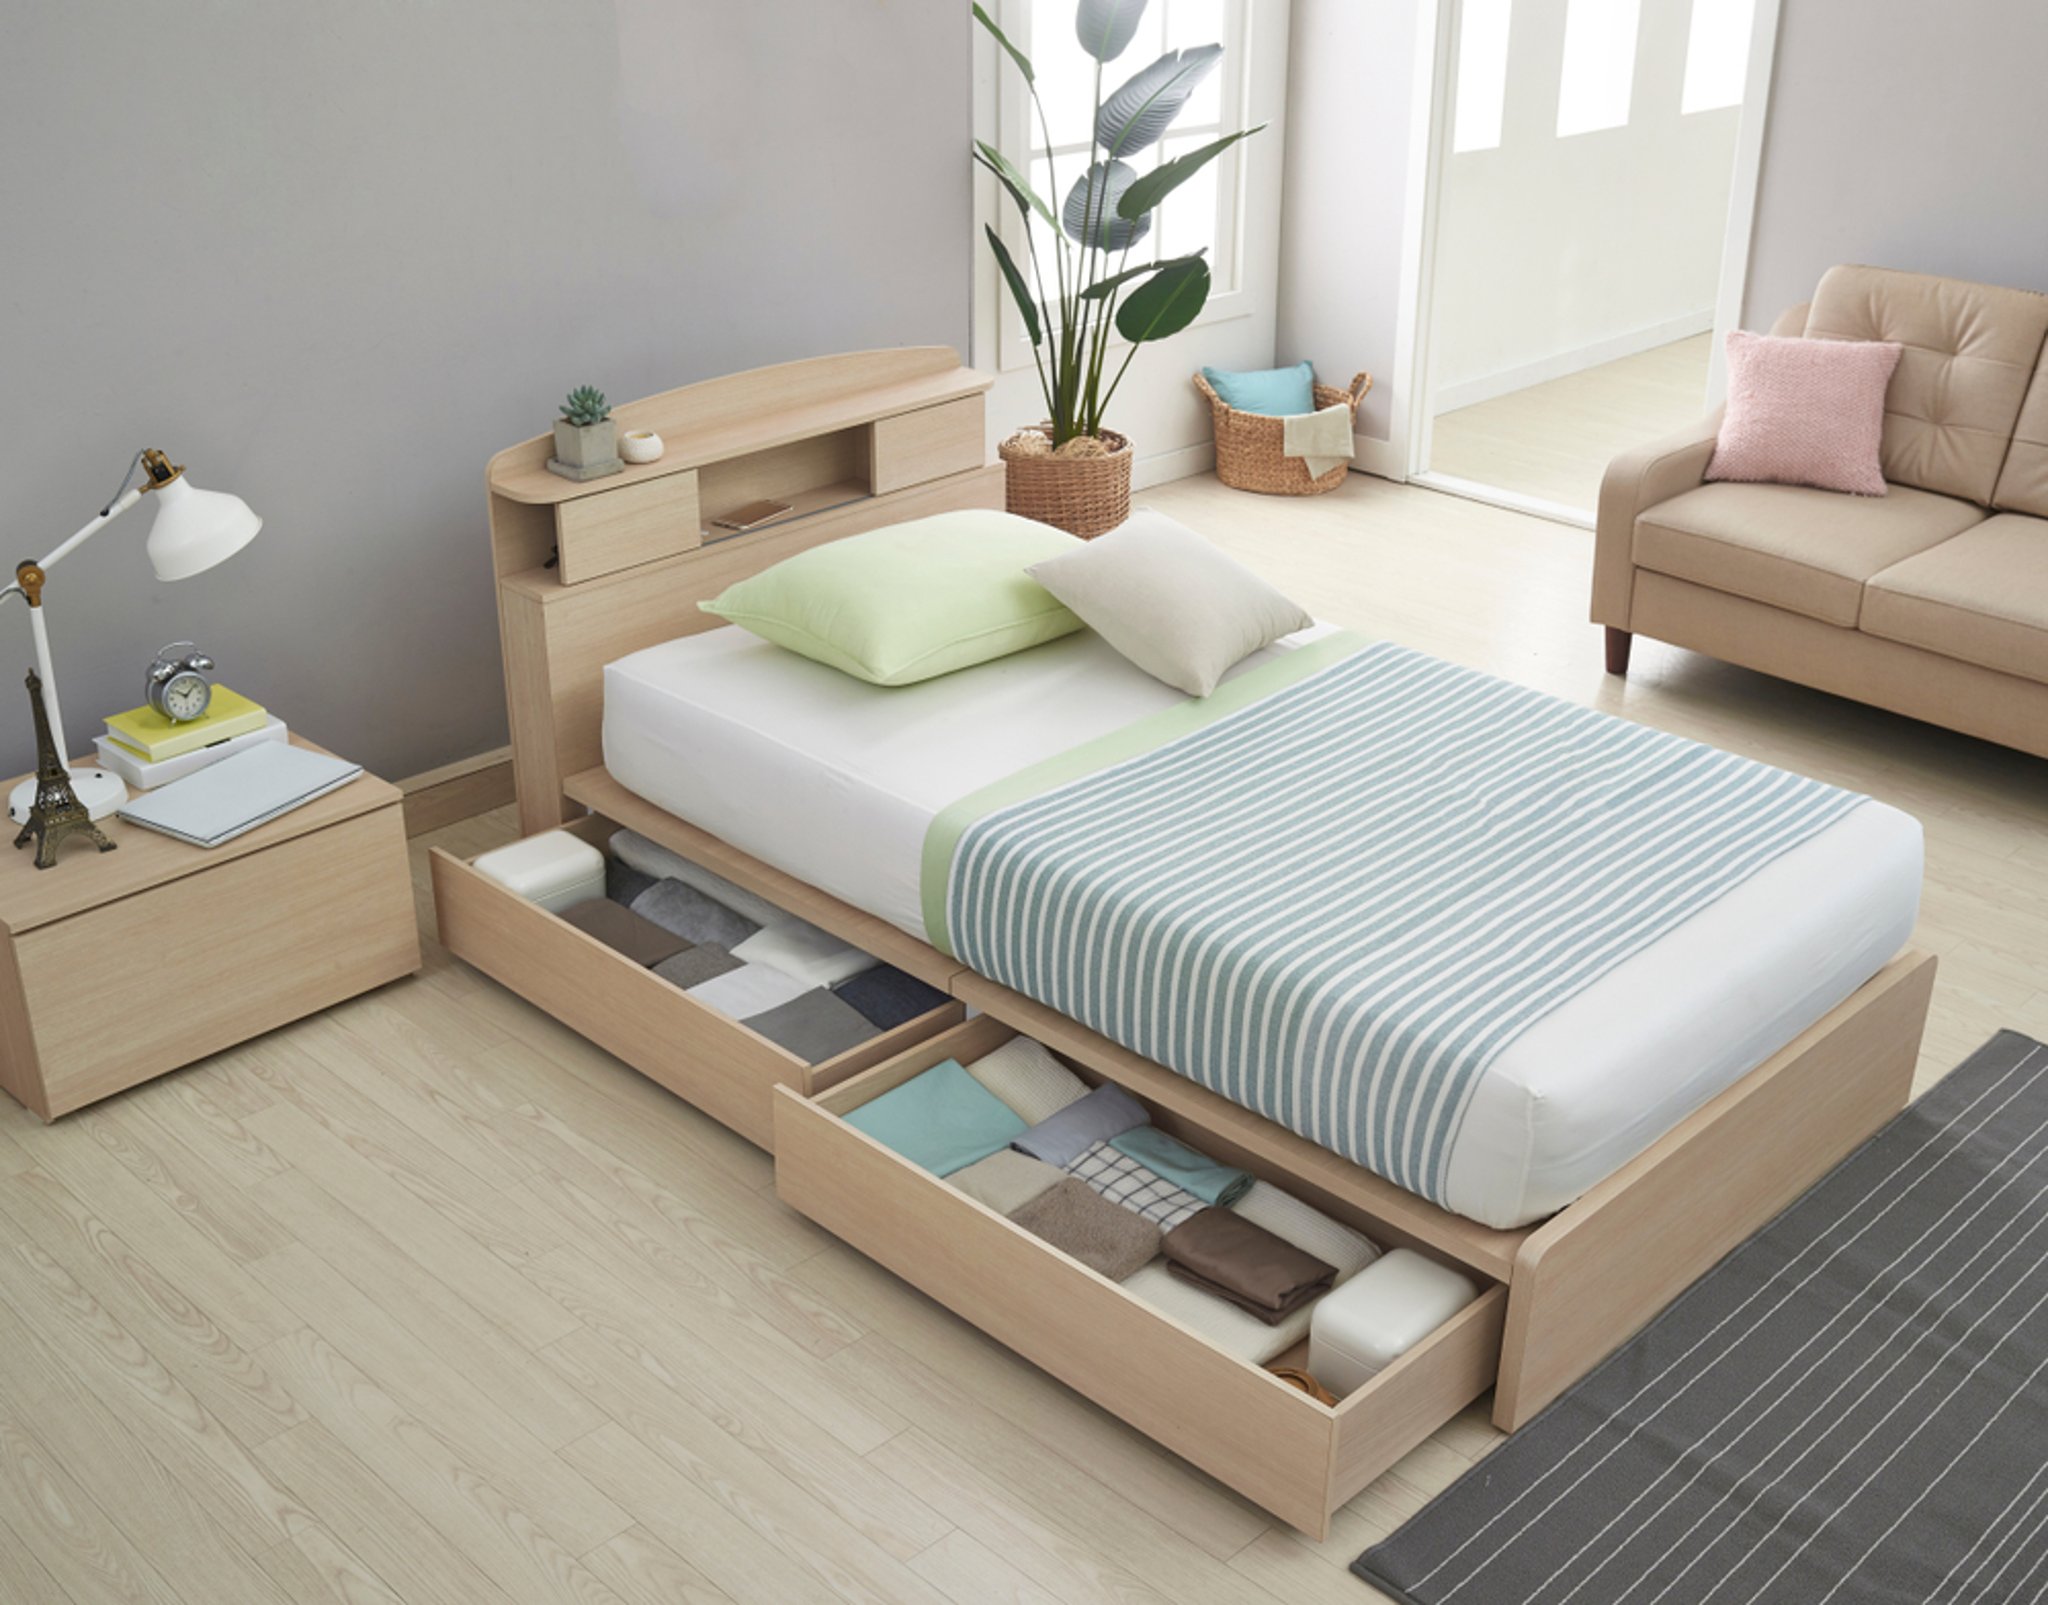 Storage Beds Uk The Best With, King Size Bed With Storage Underneath